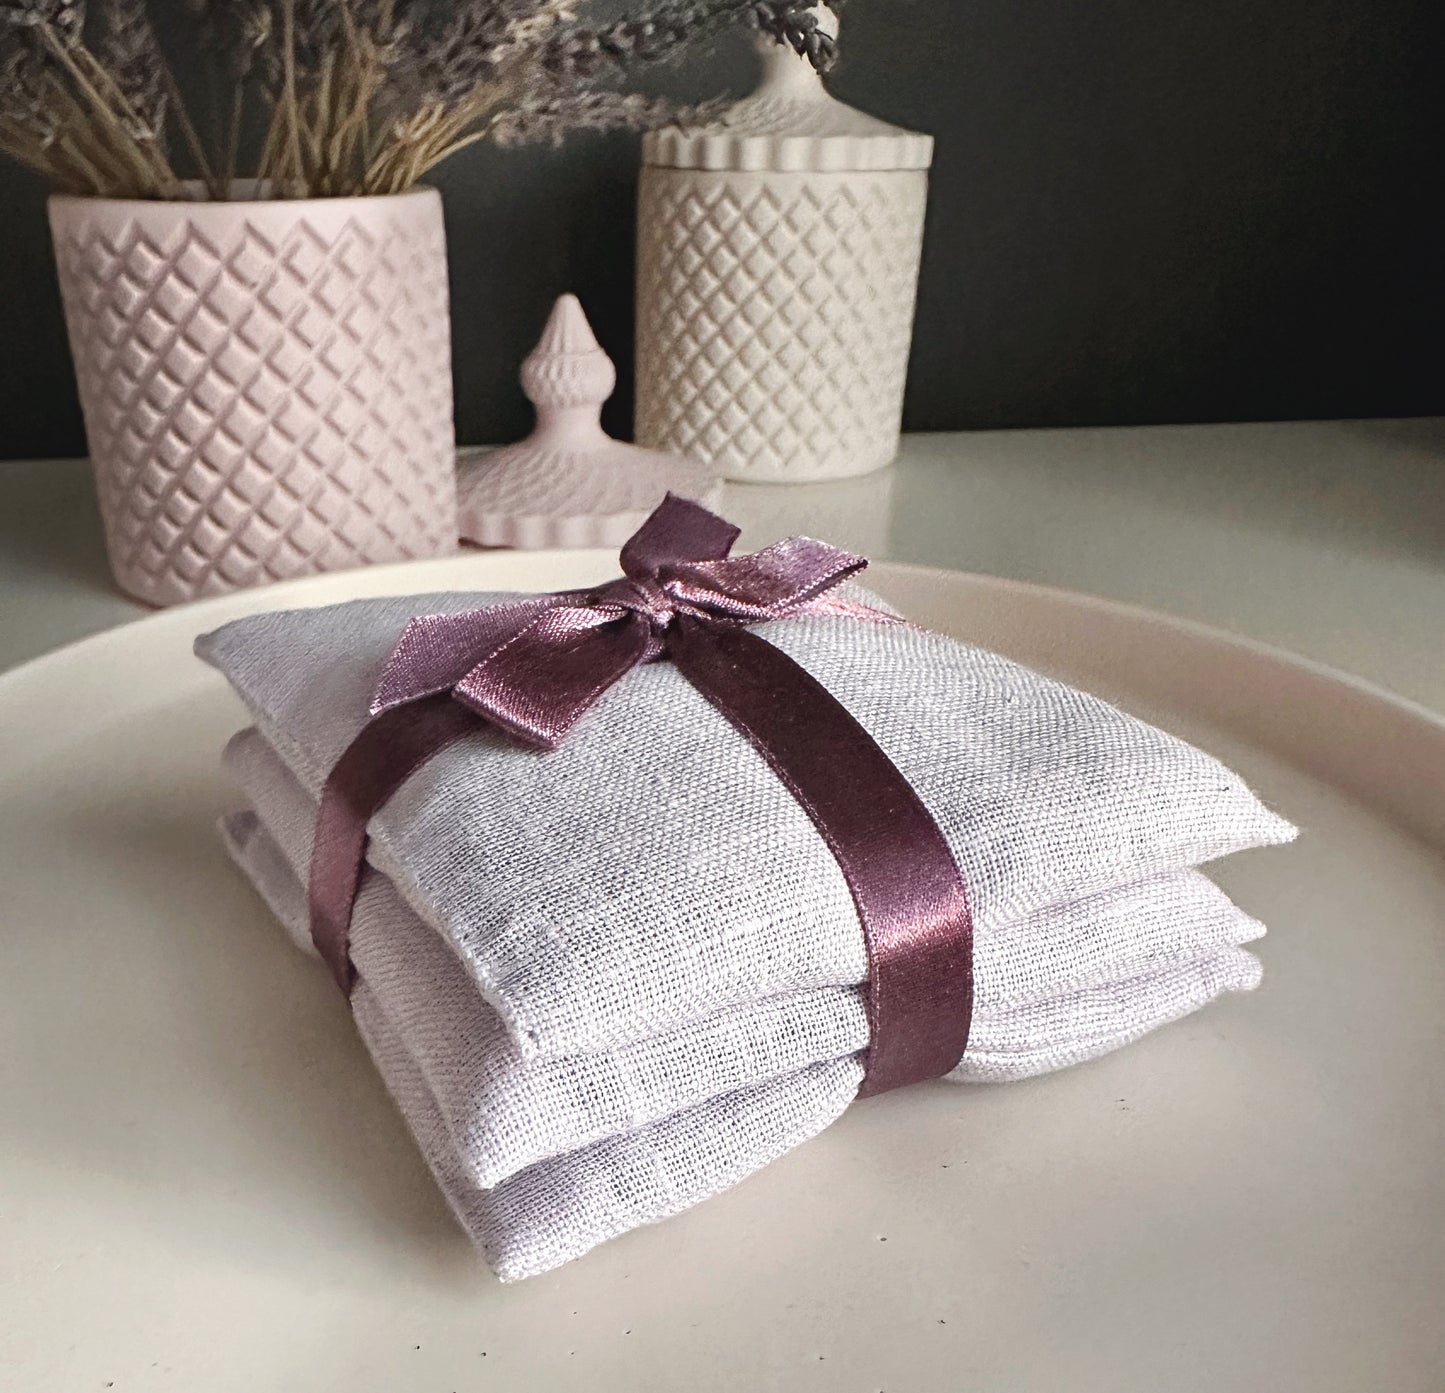 Scented lavender pads